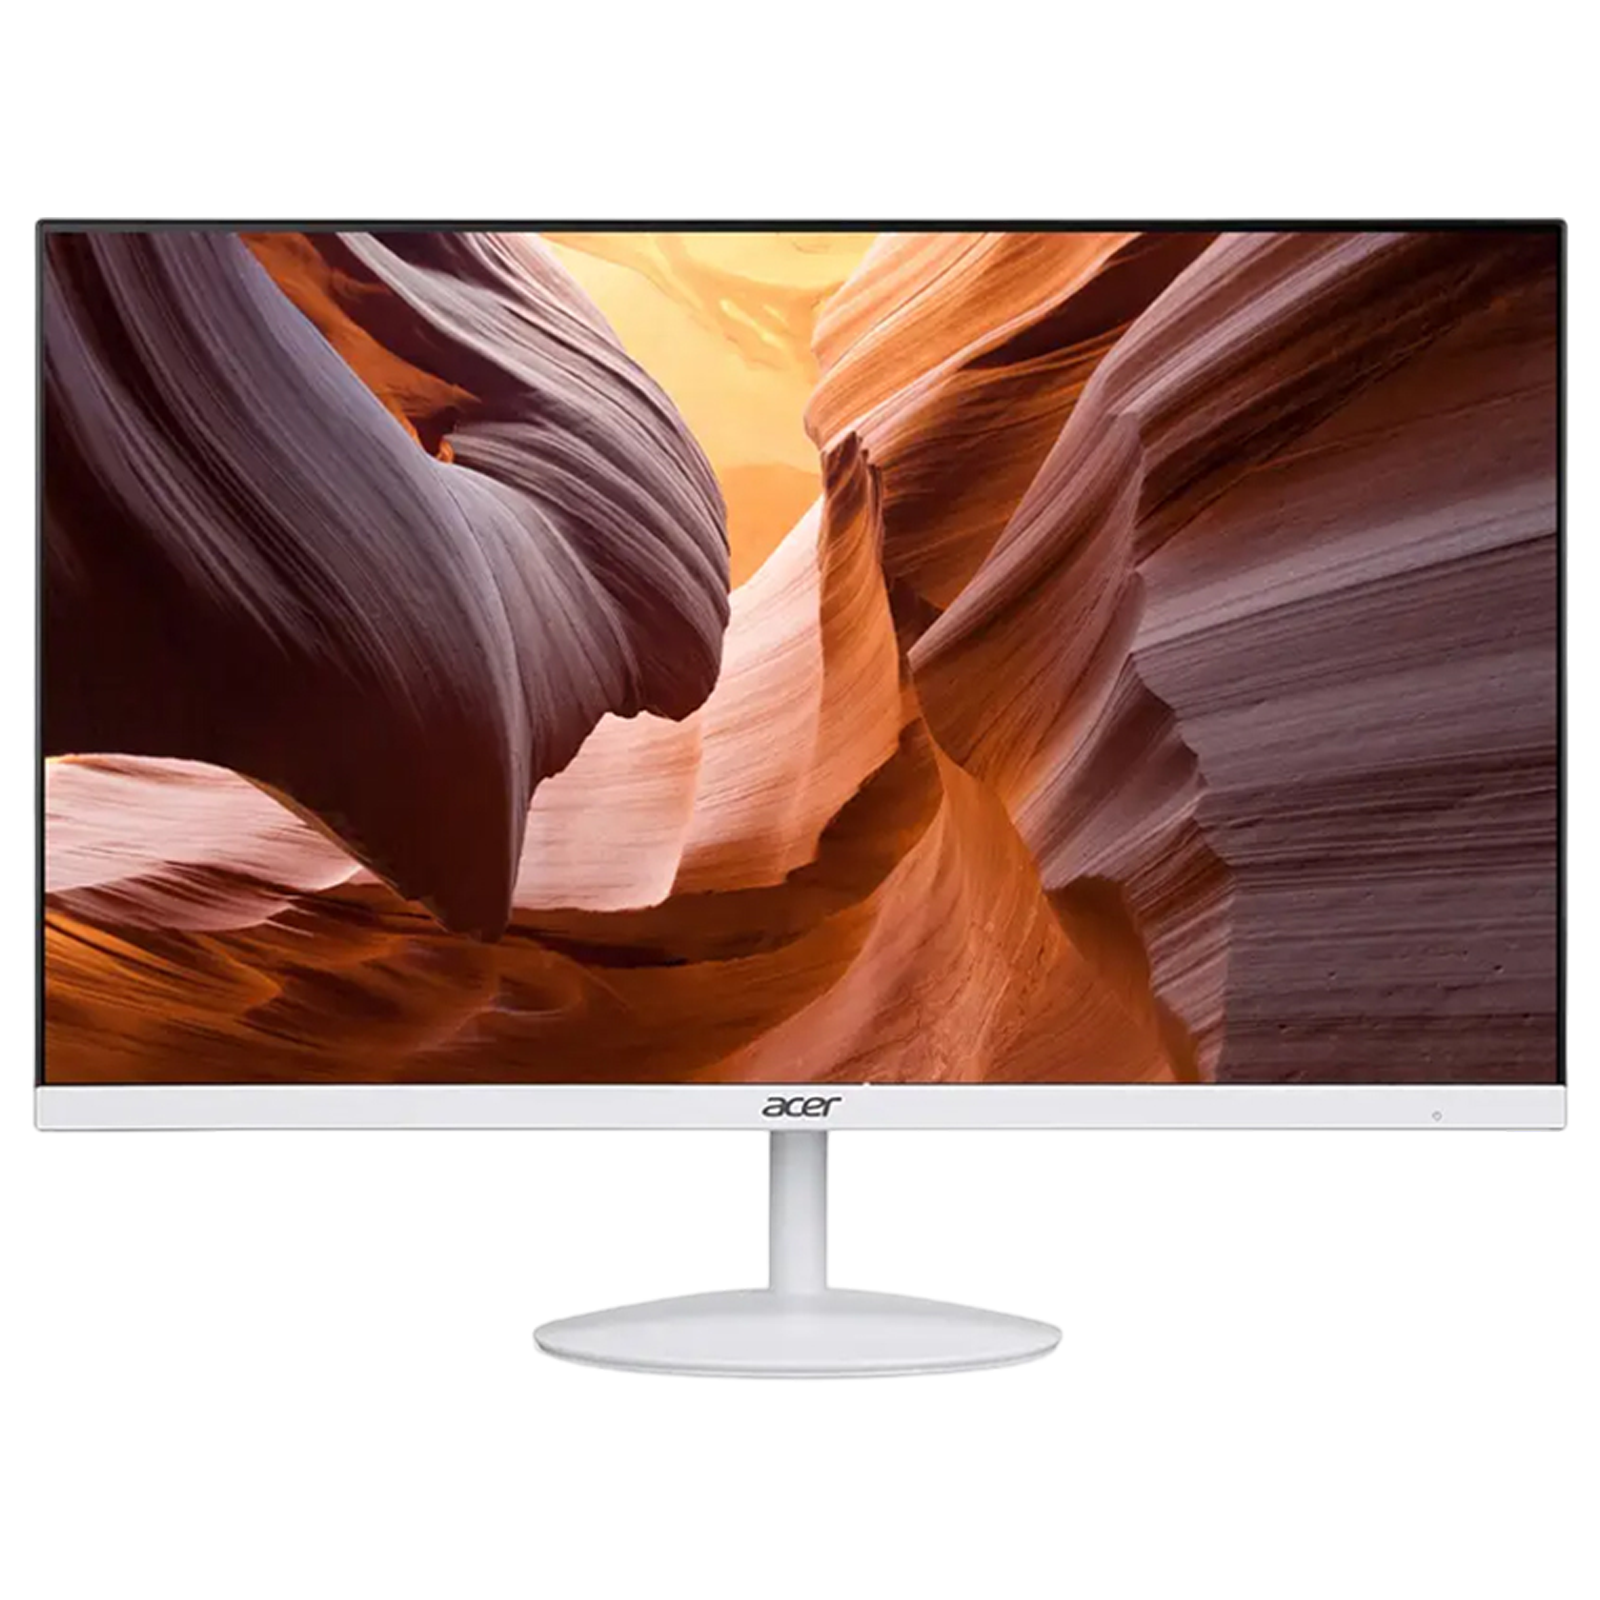 acer SA2 68.58 cm (27 inch) Full HD IPS Panel Ultra Thin Monitor with AMD Free Sync